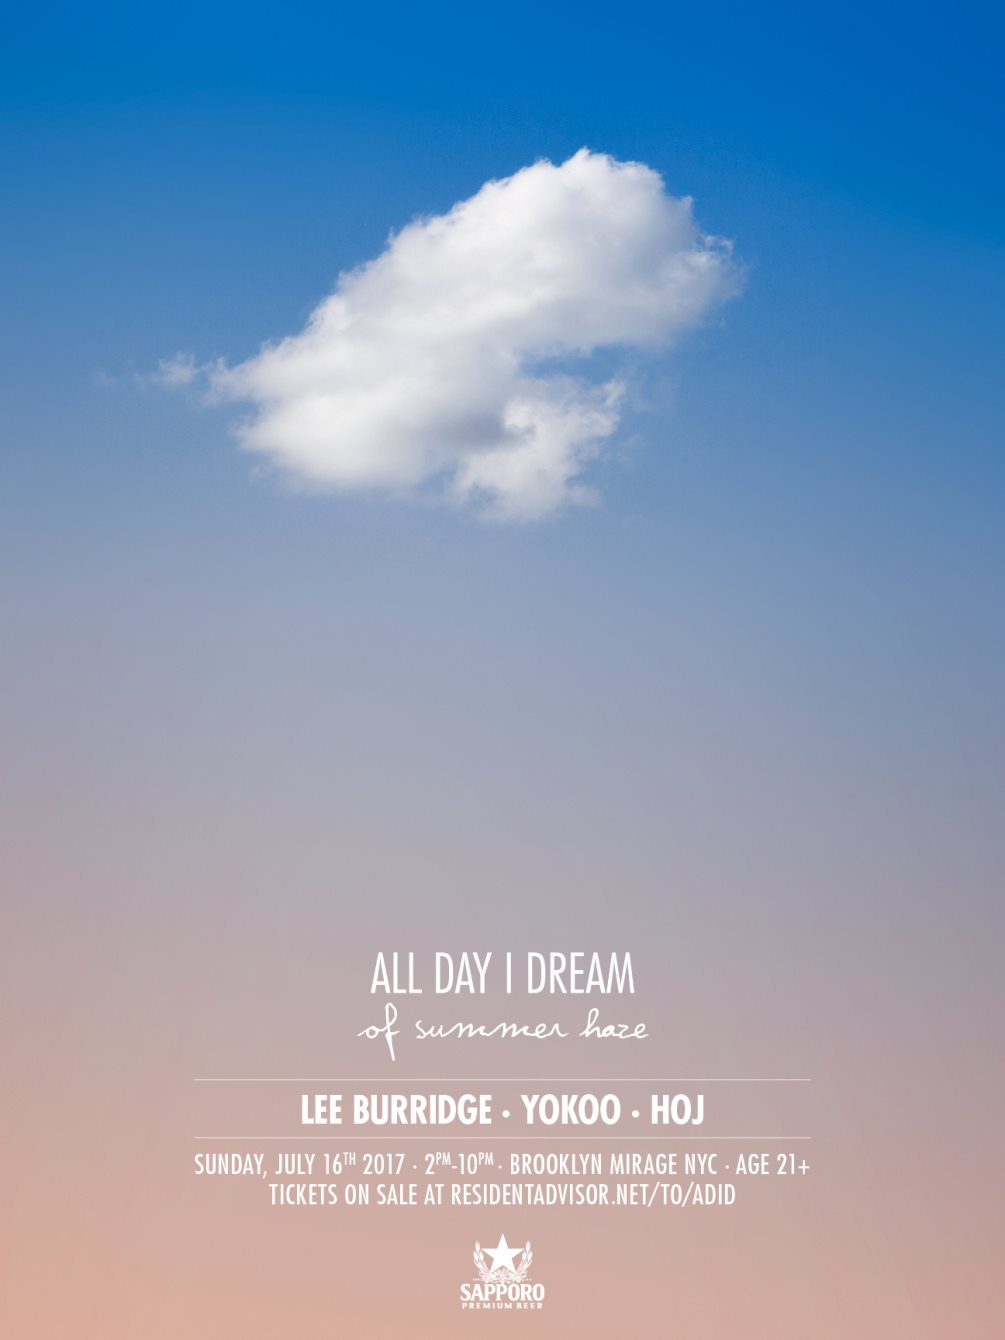 All Day I Dream of Summer Haze - Flyer front